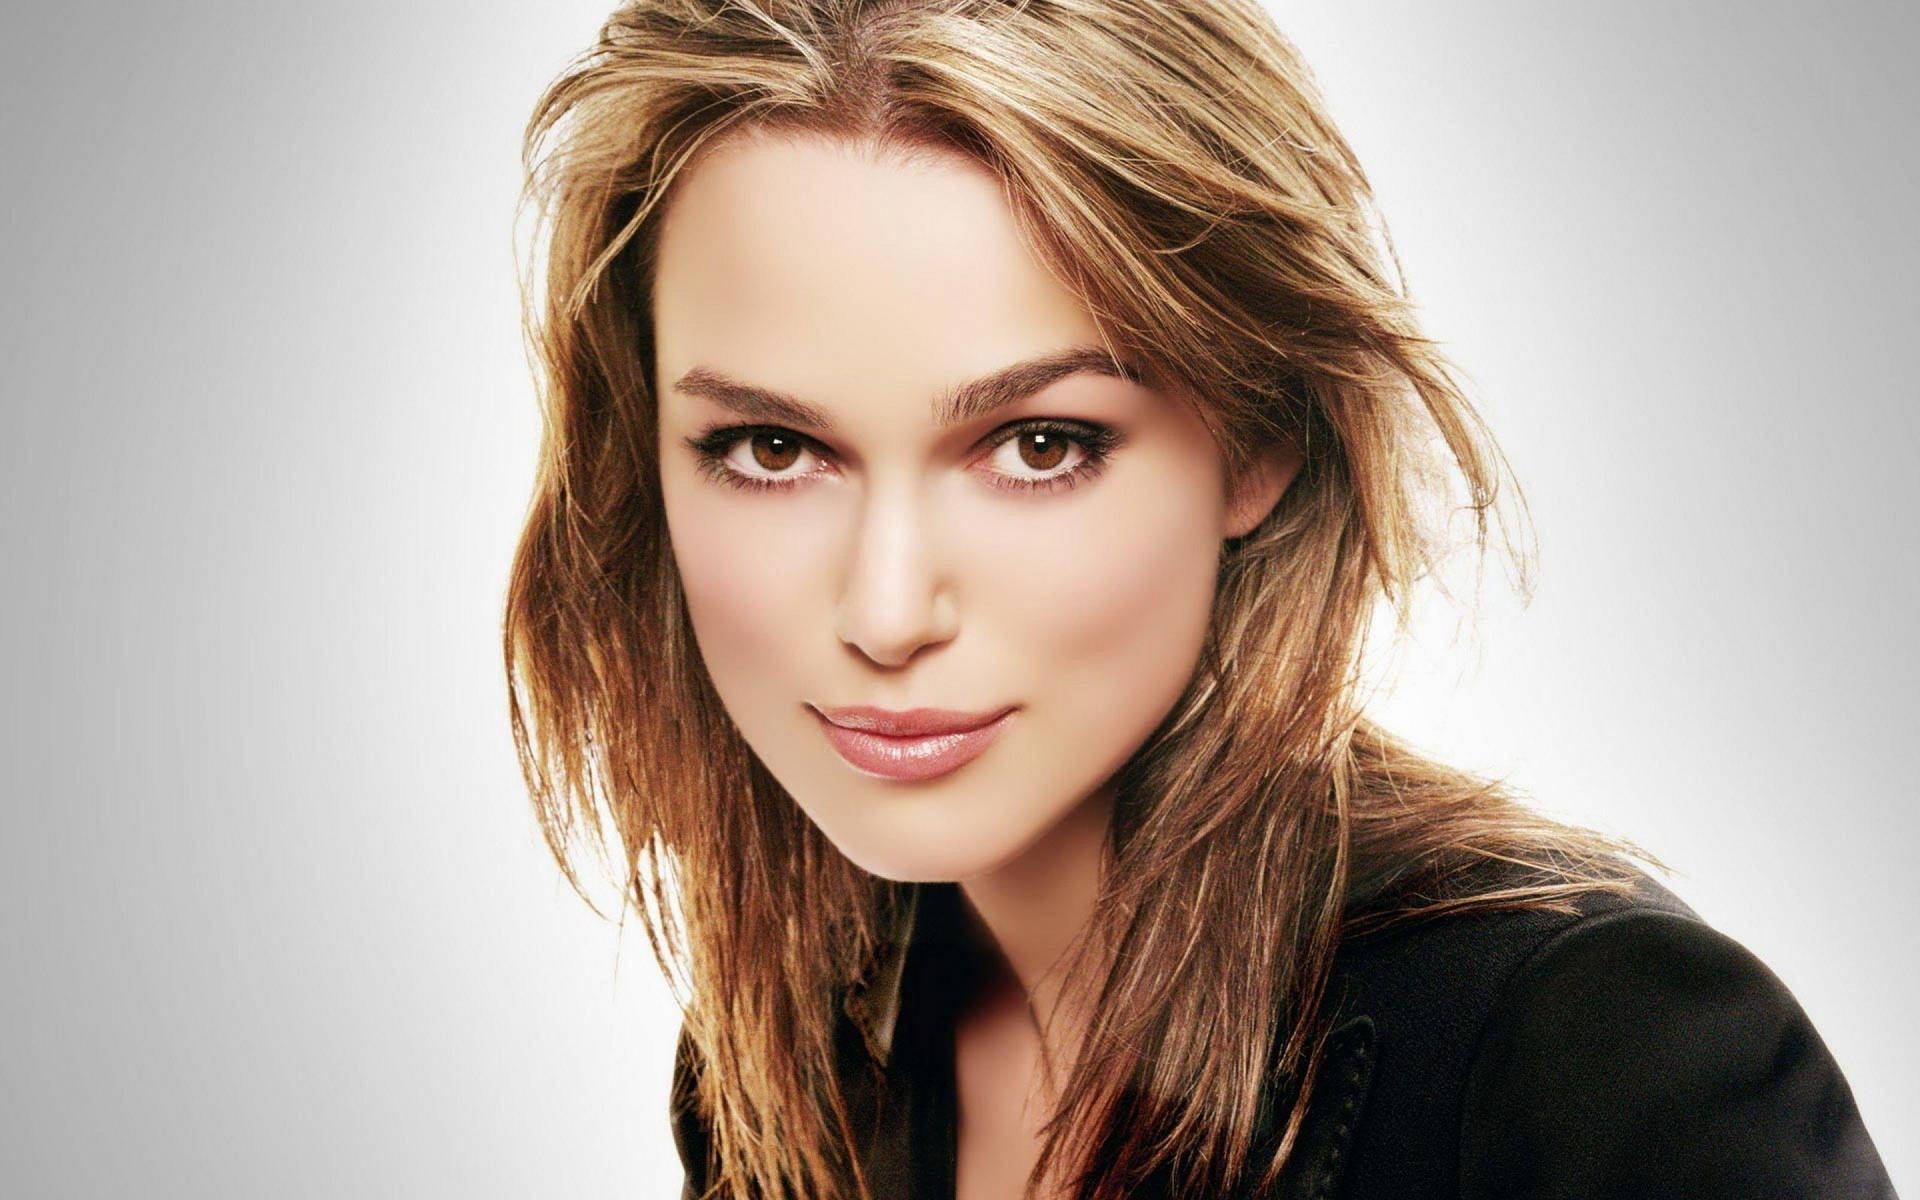 Top 999+ Keira Knightley Wallpapers Full HD, 4K✅Free to Use